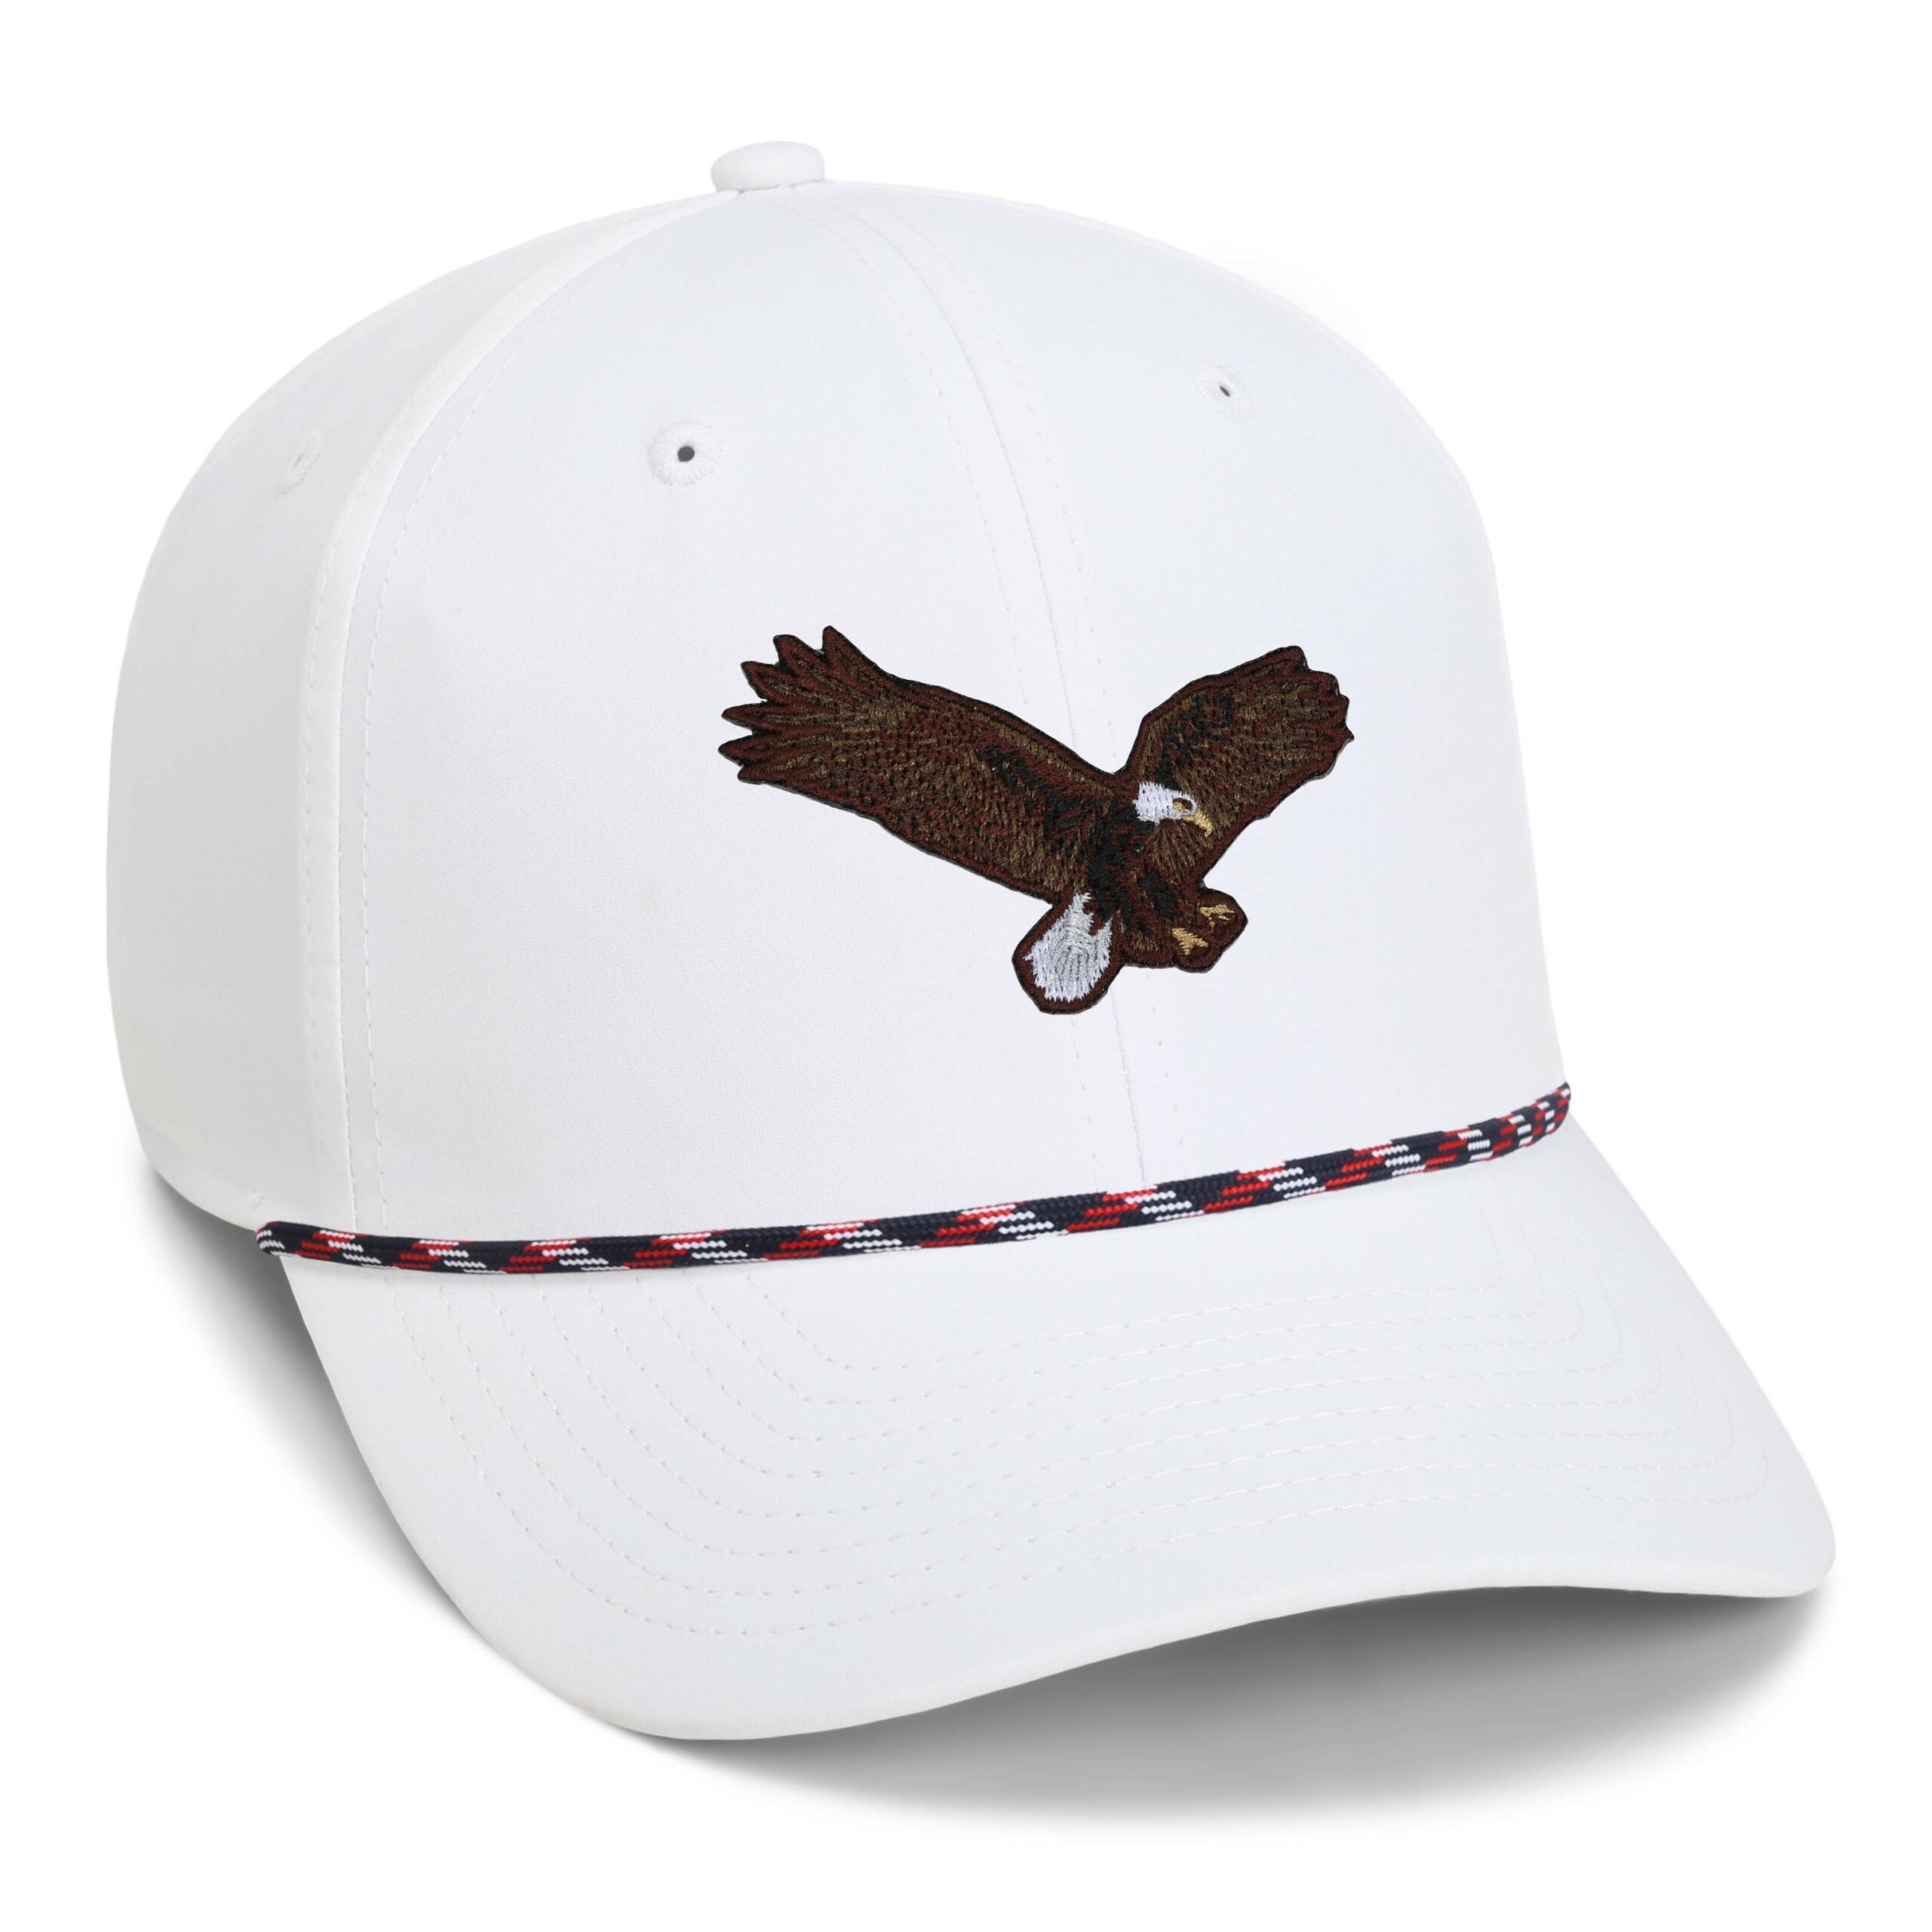 The Bald Eagle - 6-Panel Performance Rope Cap